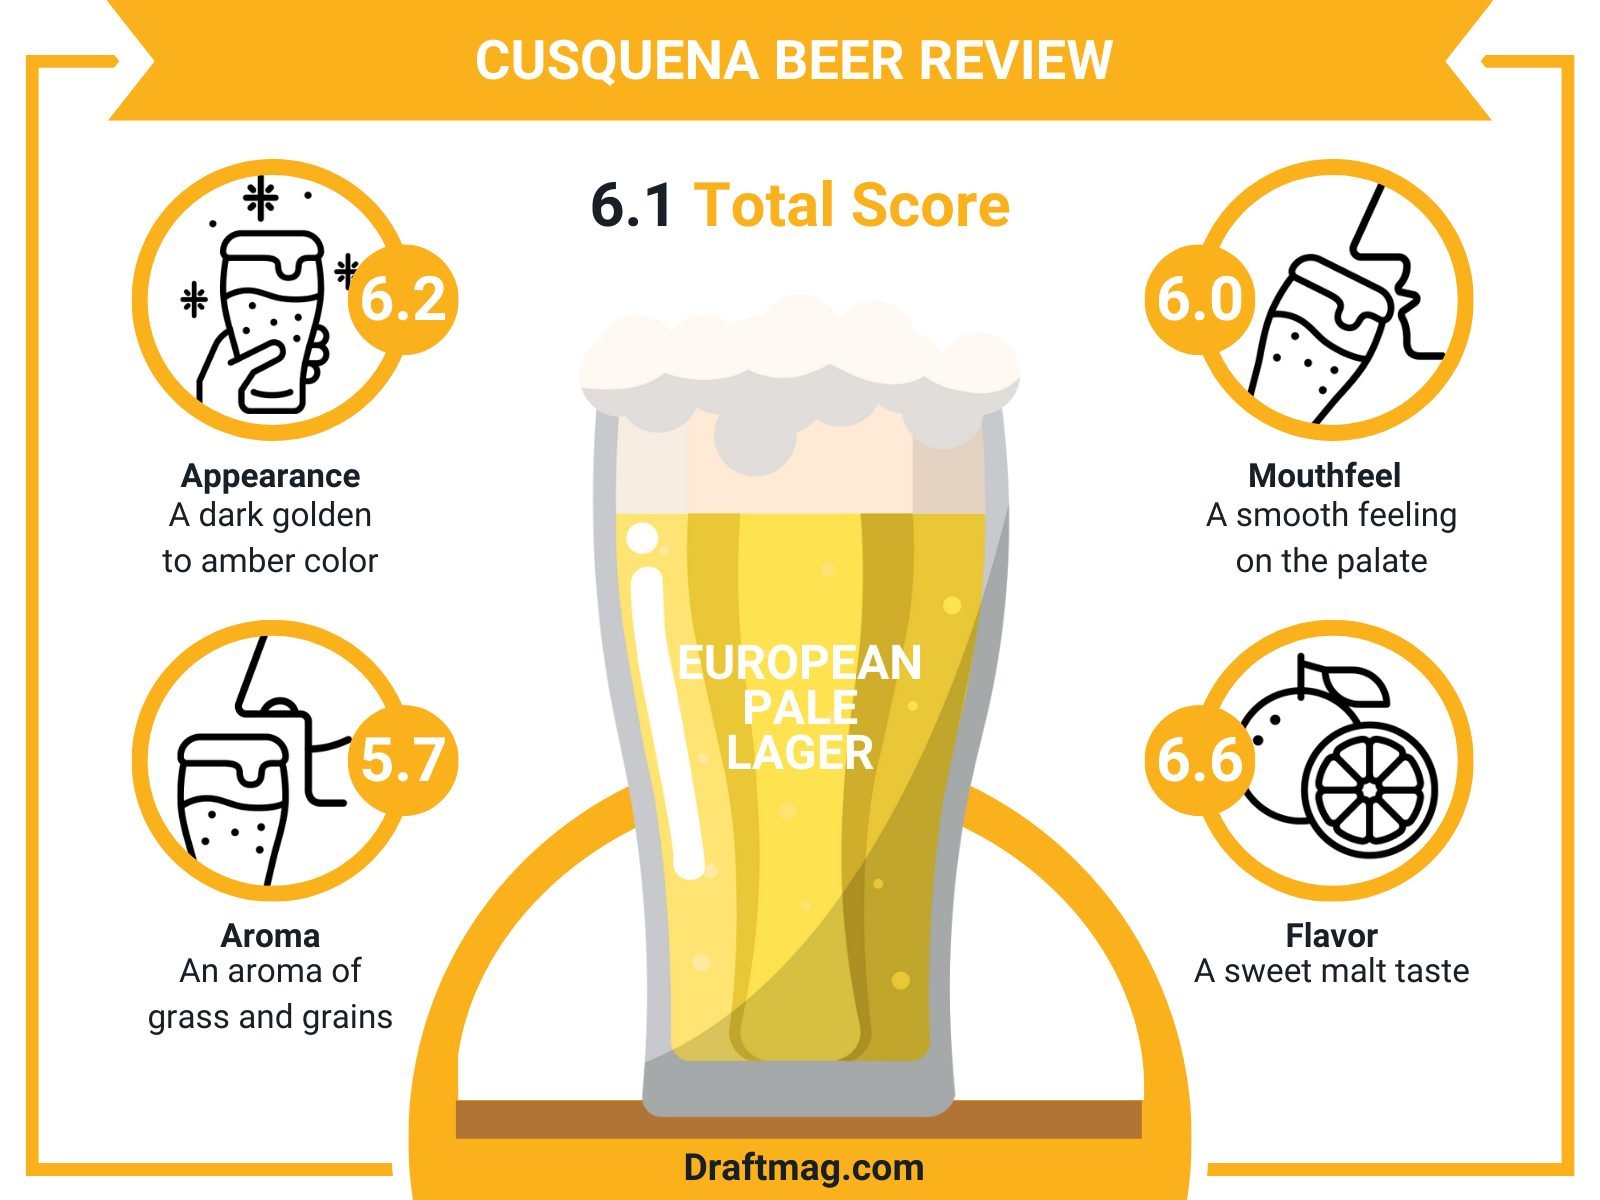 Cusquena Beer Review Infographic